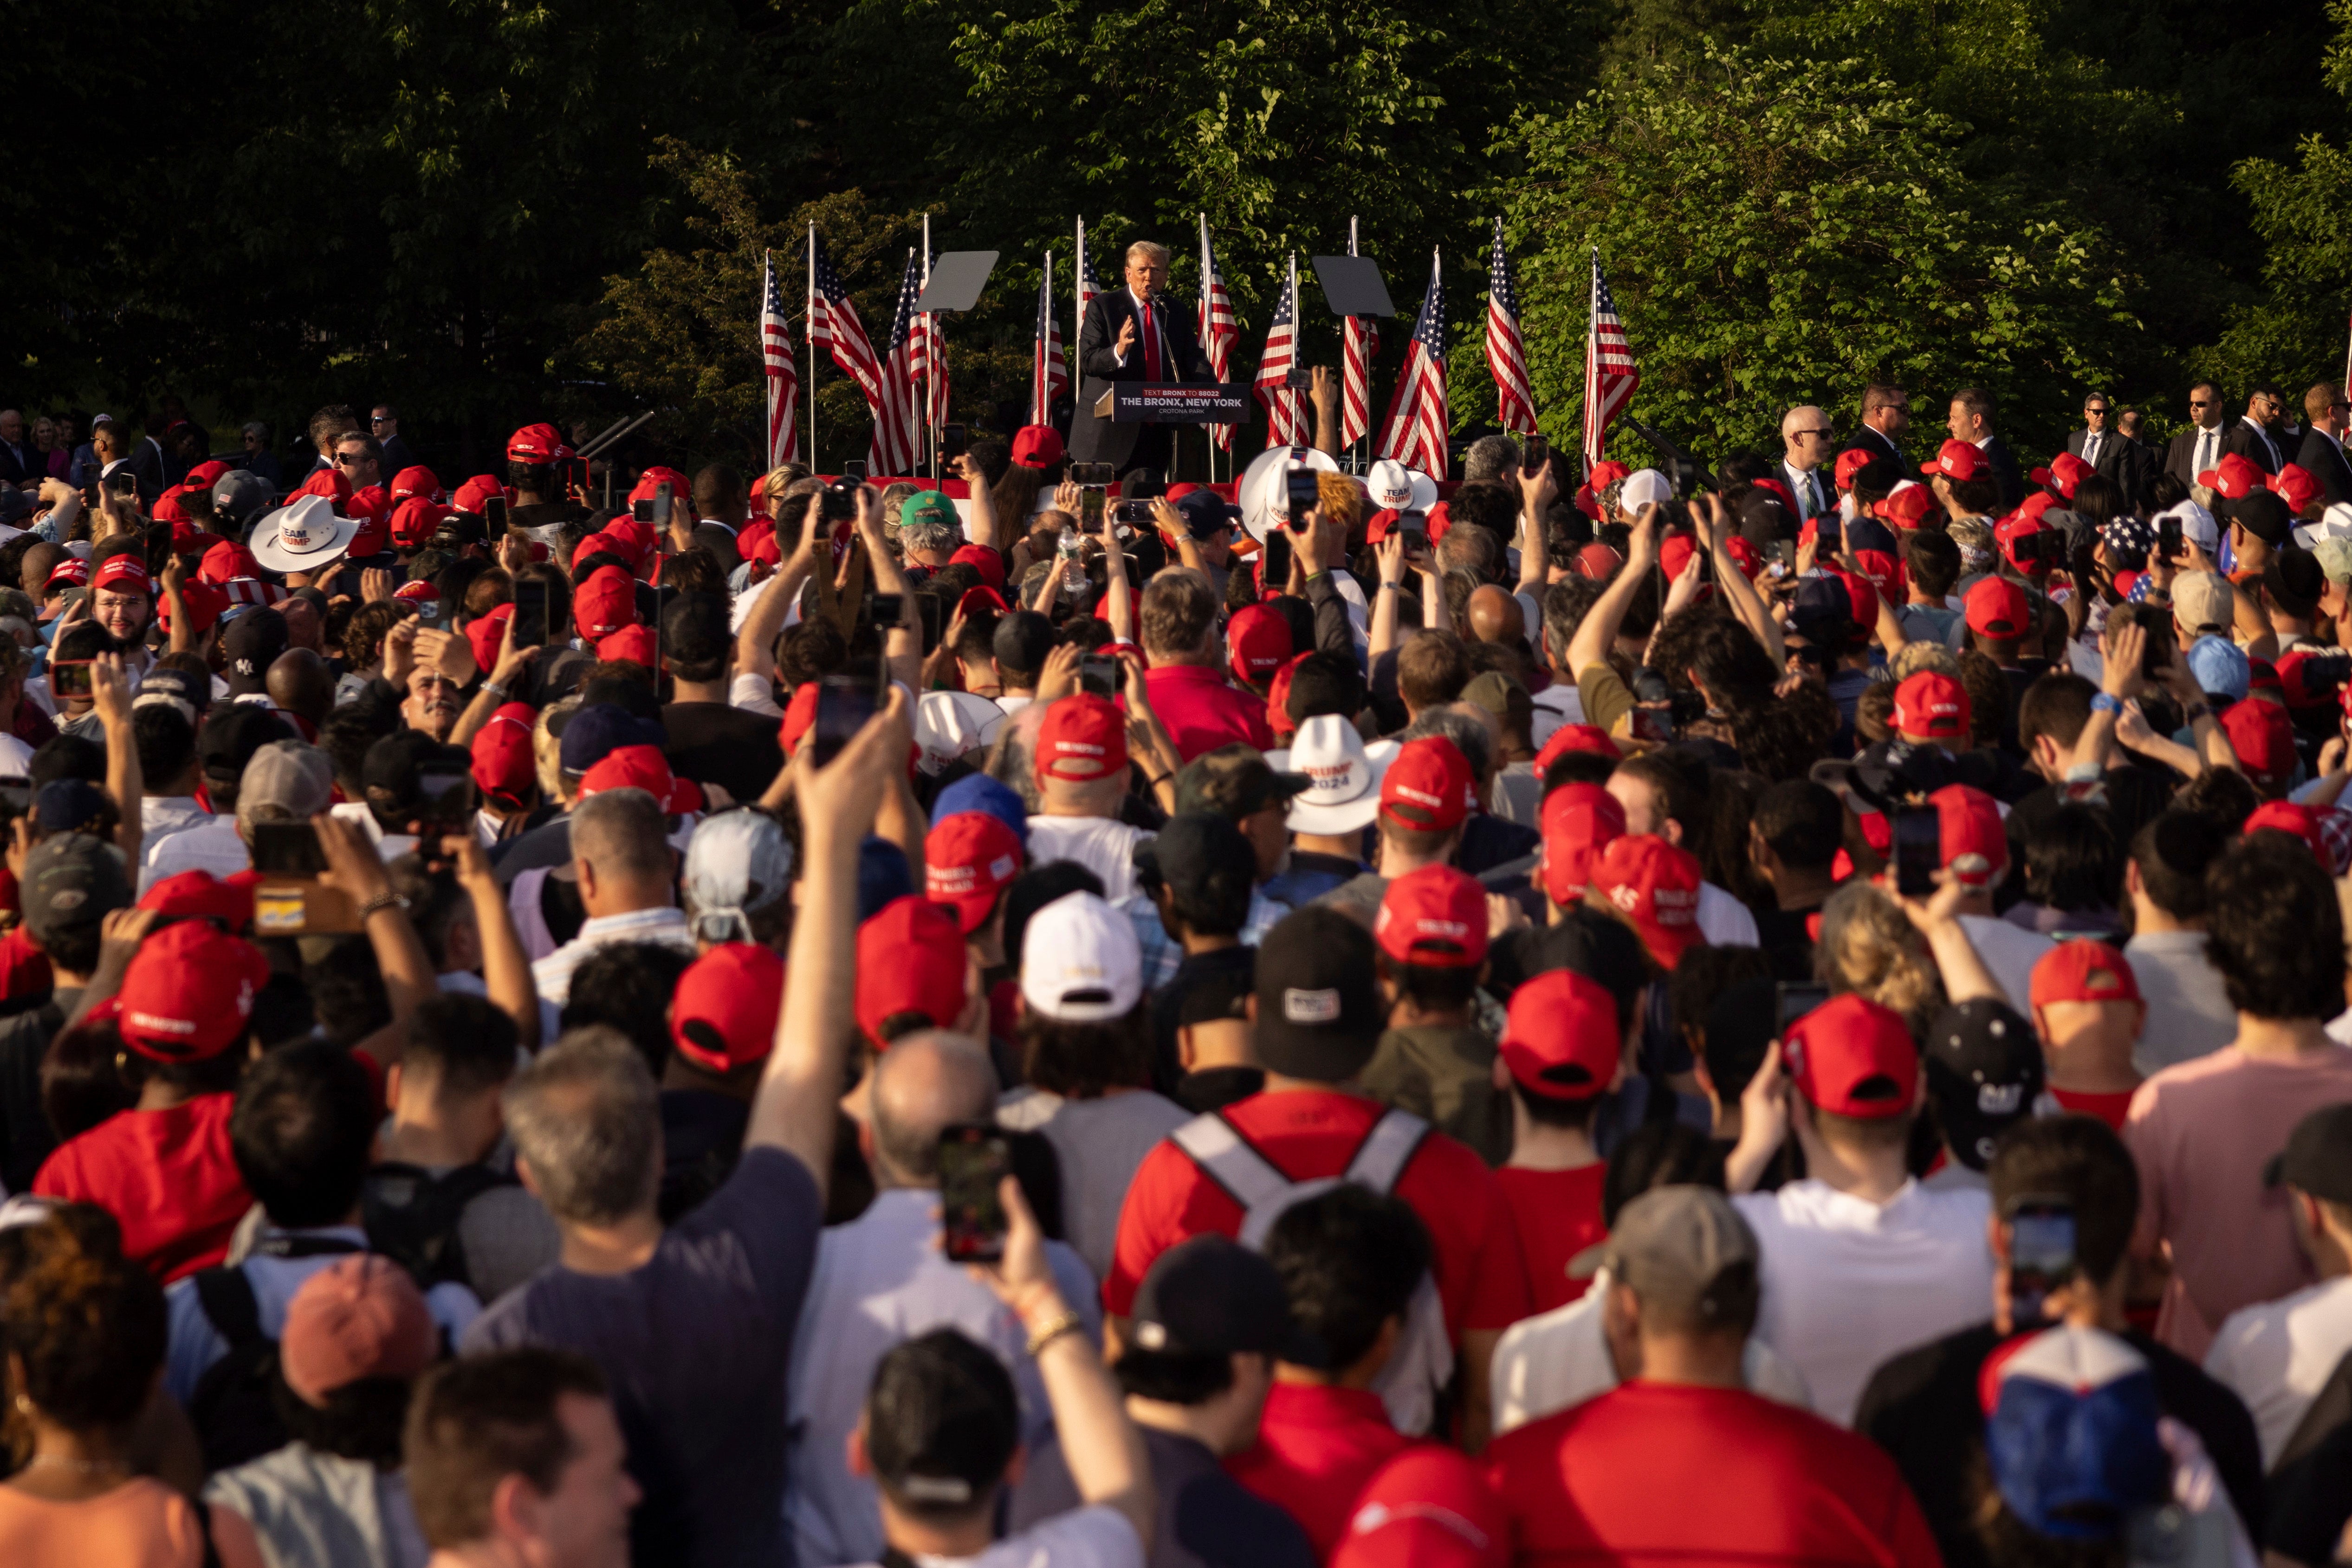 A sea of Maga supporters sport their red caps at Donald Trumps New York rally on Thursday